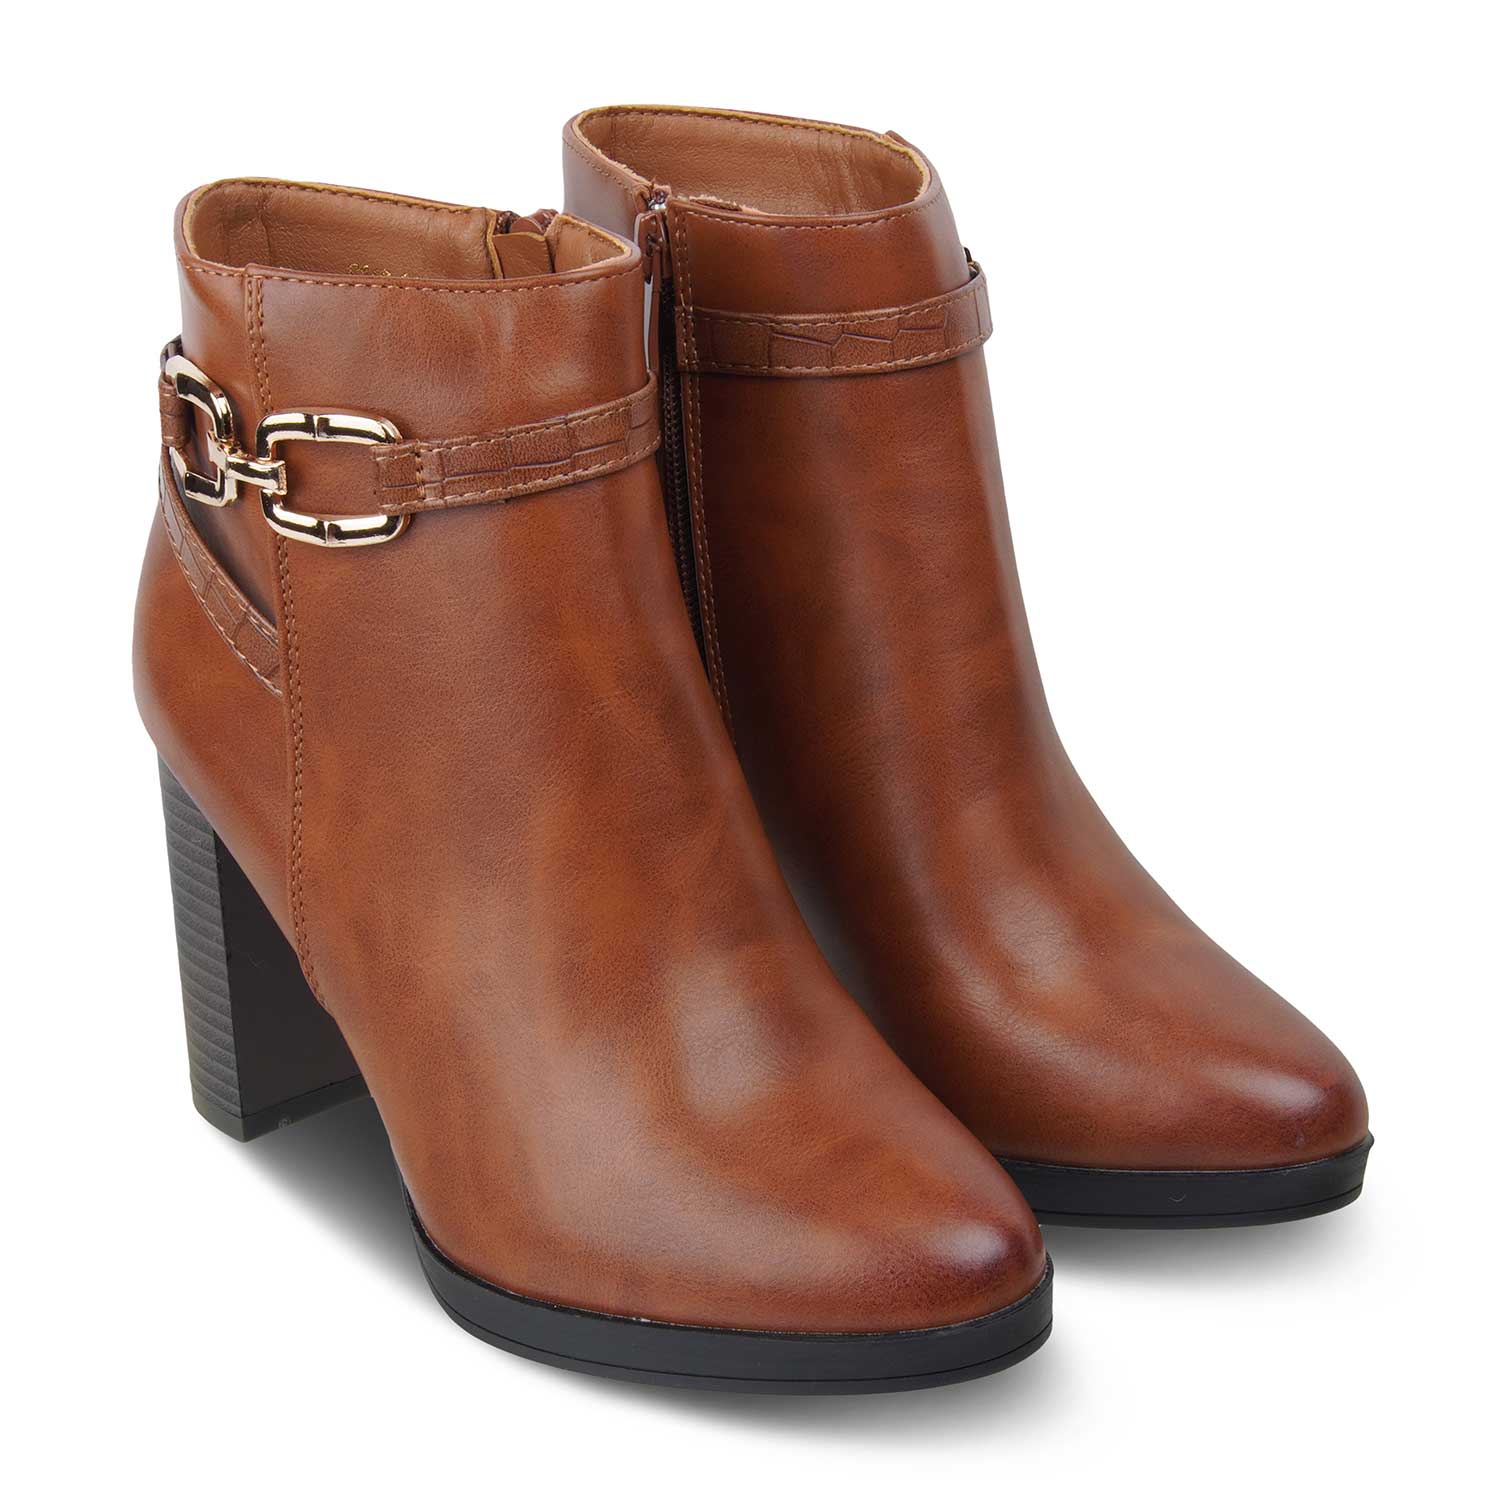 The Paris Camel Women's Ankle-length Boots Tresmode - Tresmode